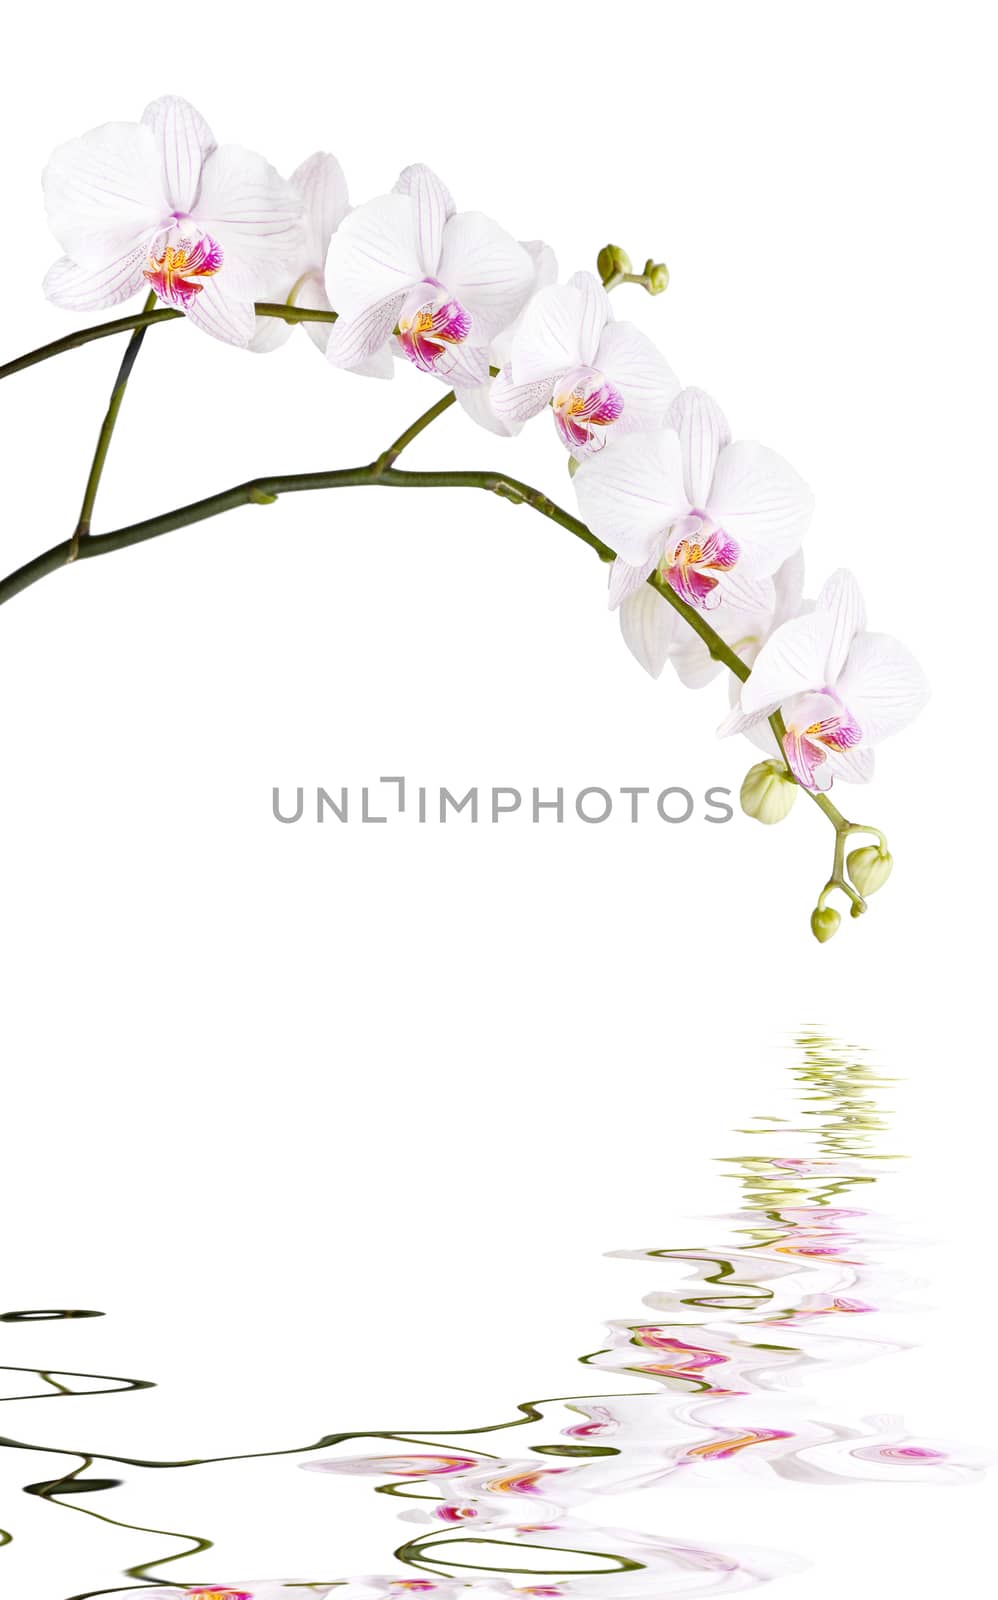 Long branch of white orchids phalaenopsis isolated on a white background, reflected in the water surface with small waves